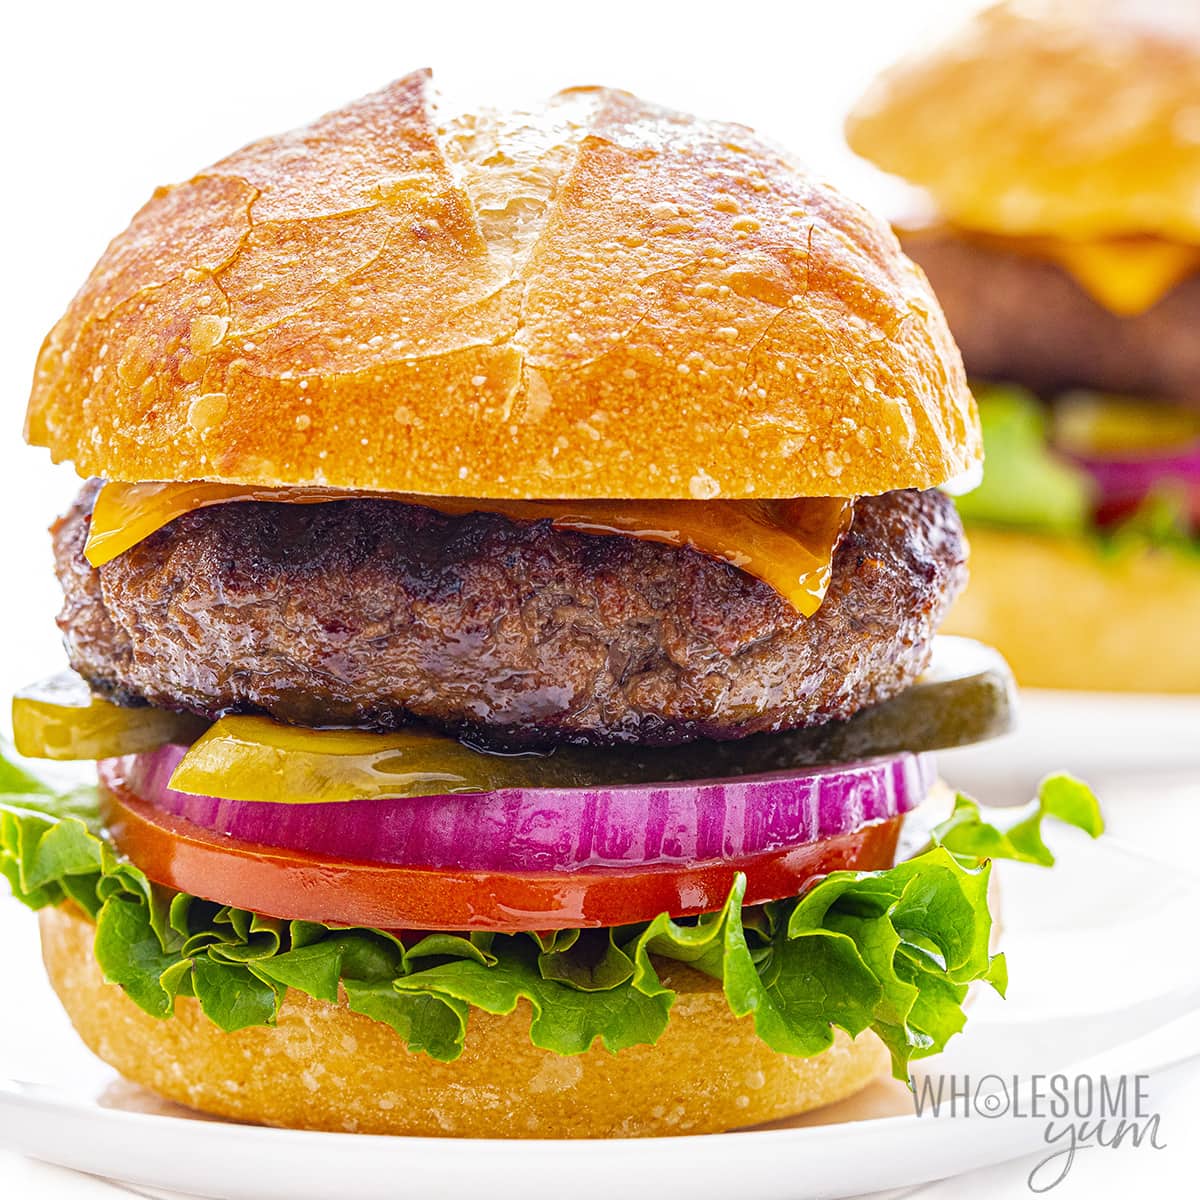 Best burger recipe with juicy burgers on buns with fixings.